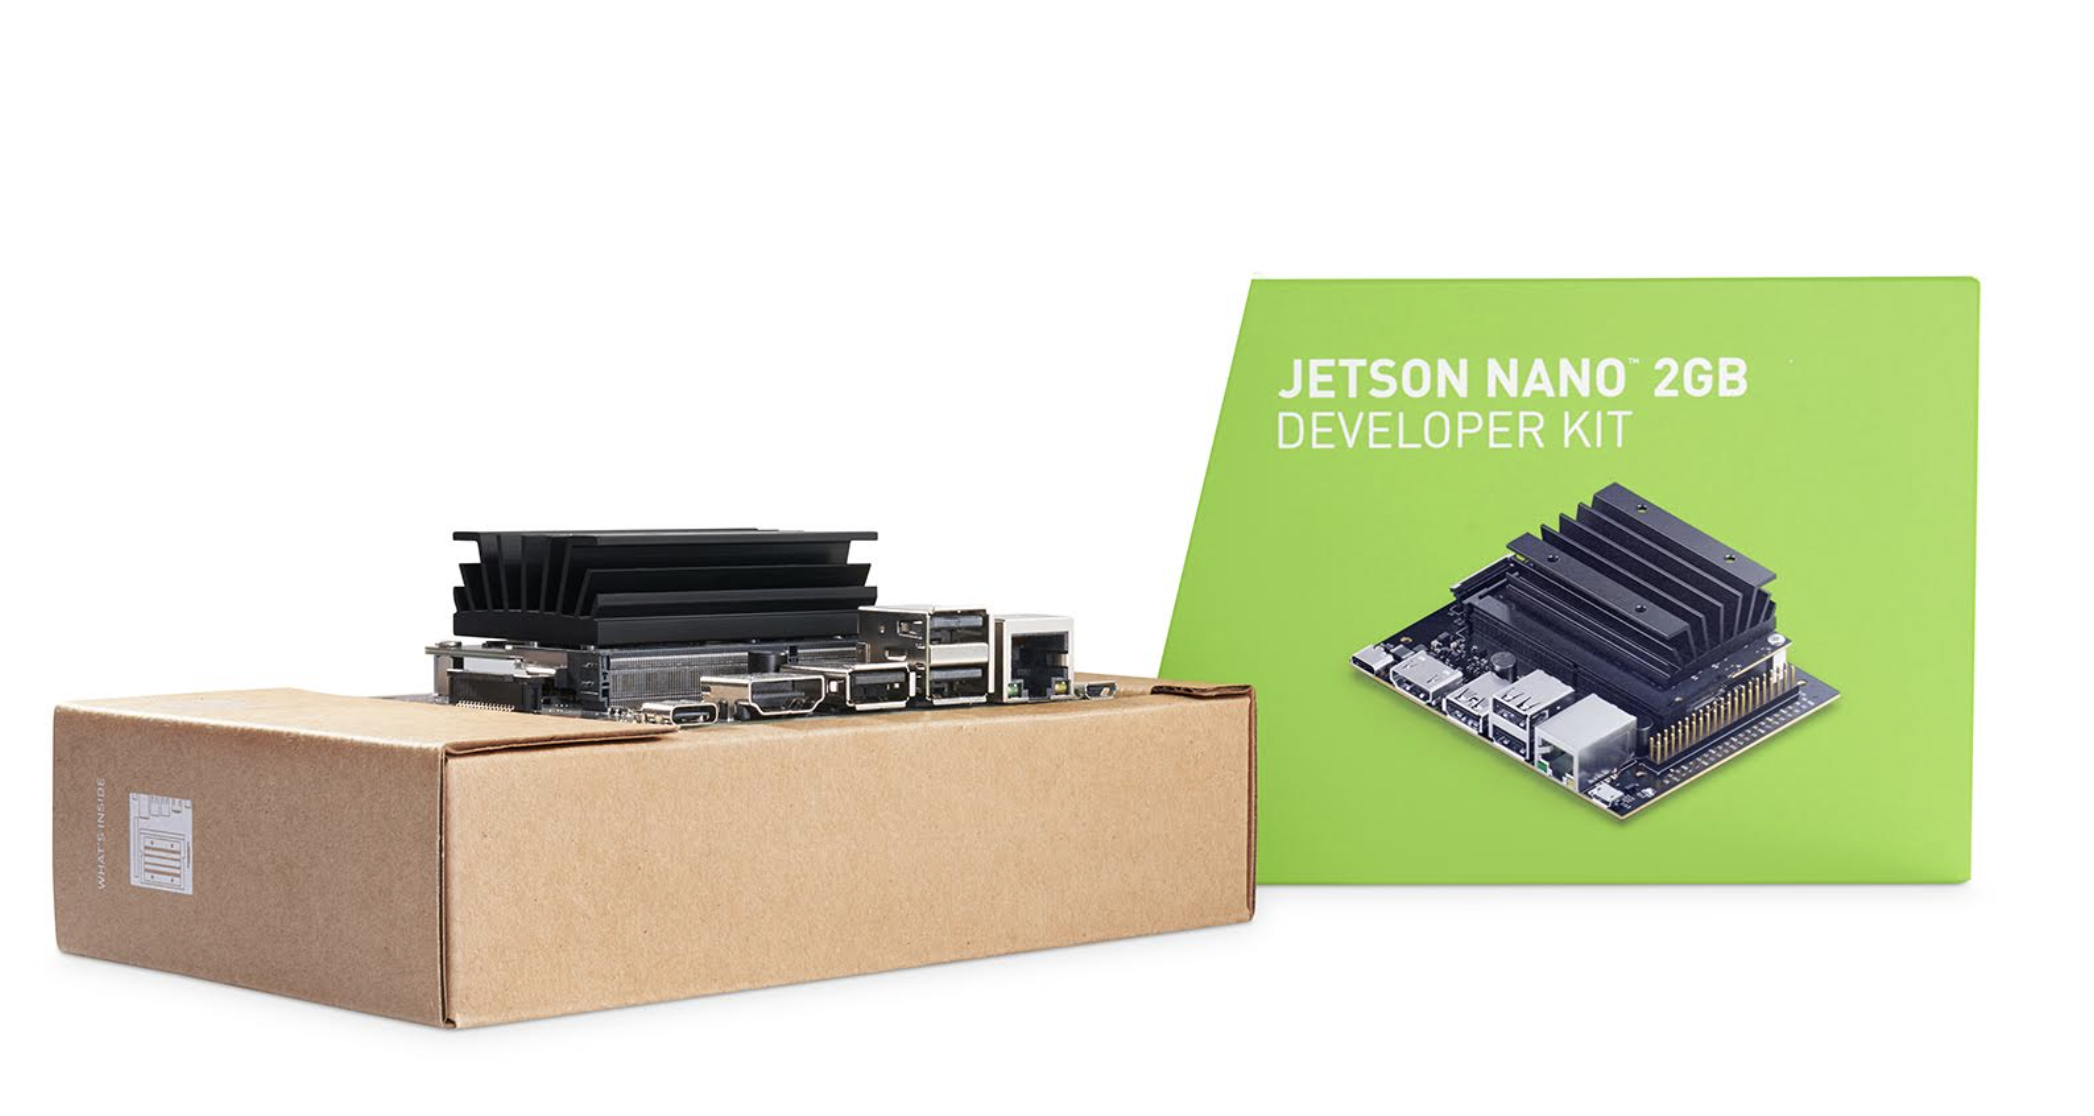 Introducing 2GB NVIDIA Jetson Nano: An Affordable Yet Powerful $59 AI Computer